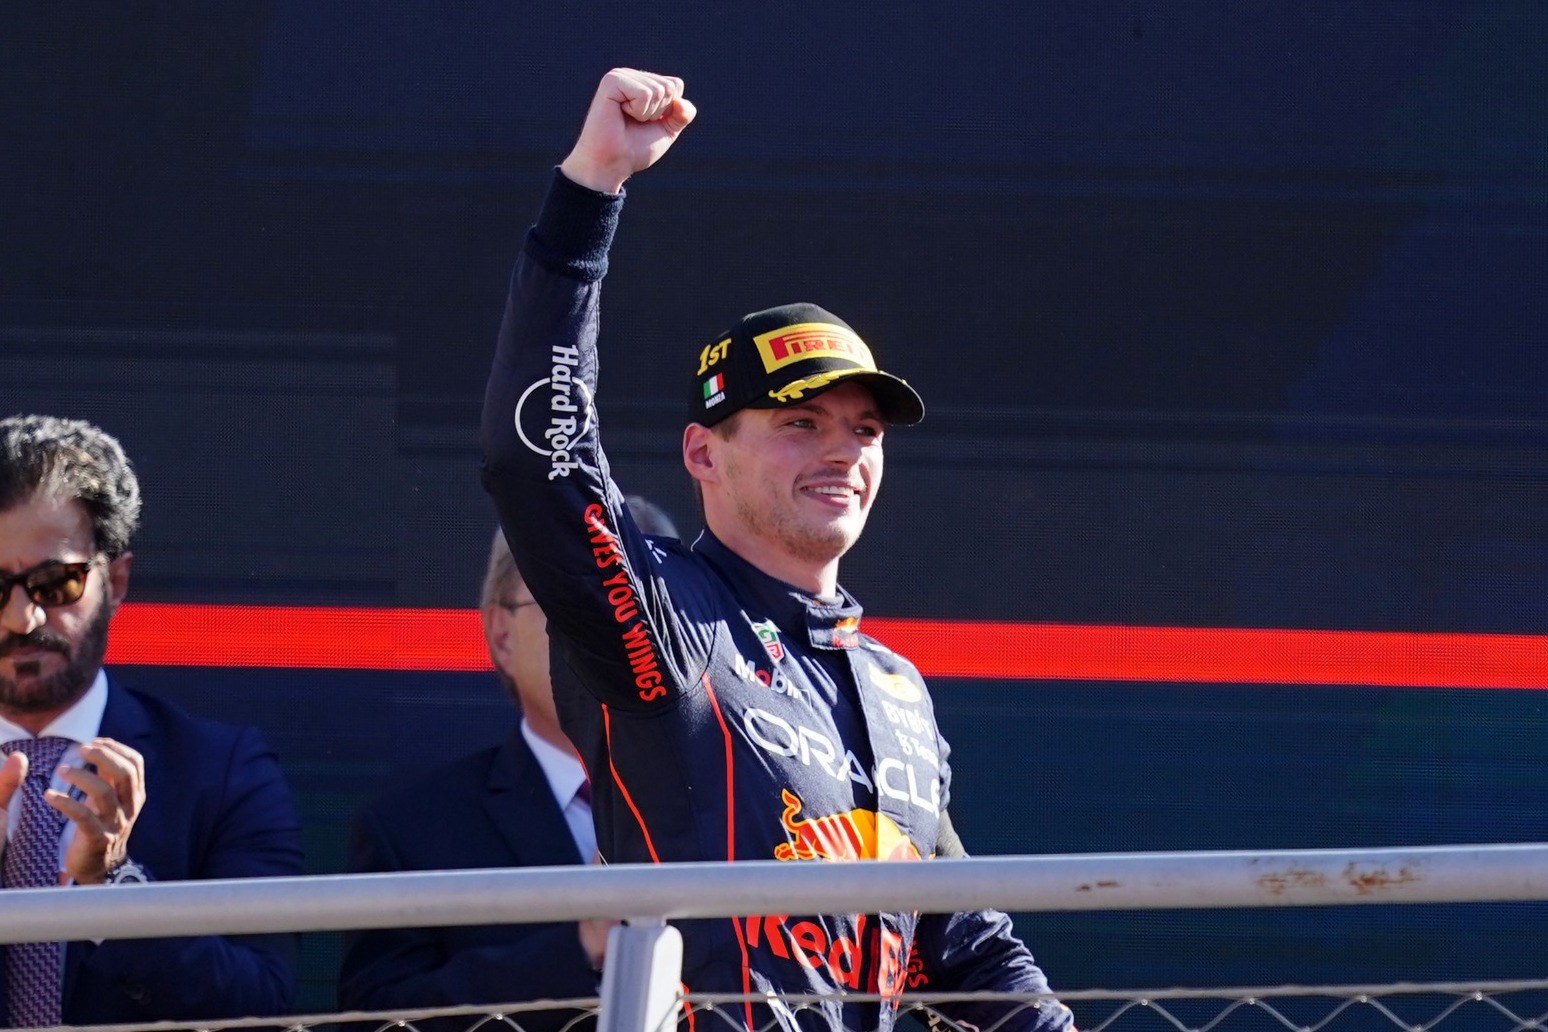 Max Verstappen crowned F1 world champion amid confusion after victory in Japan 